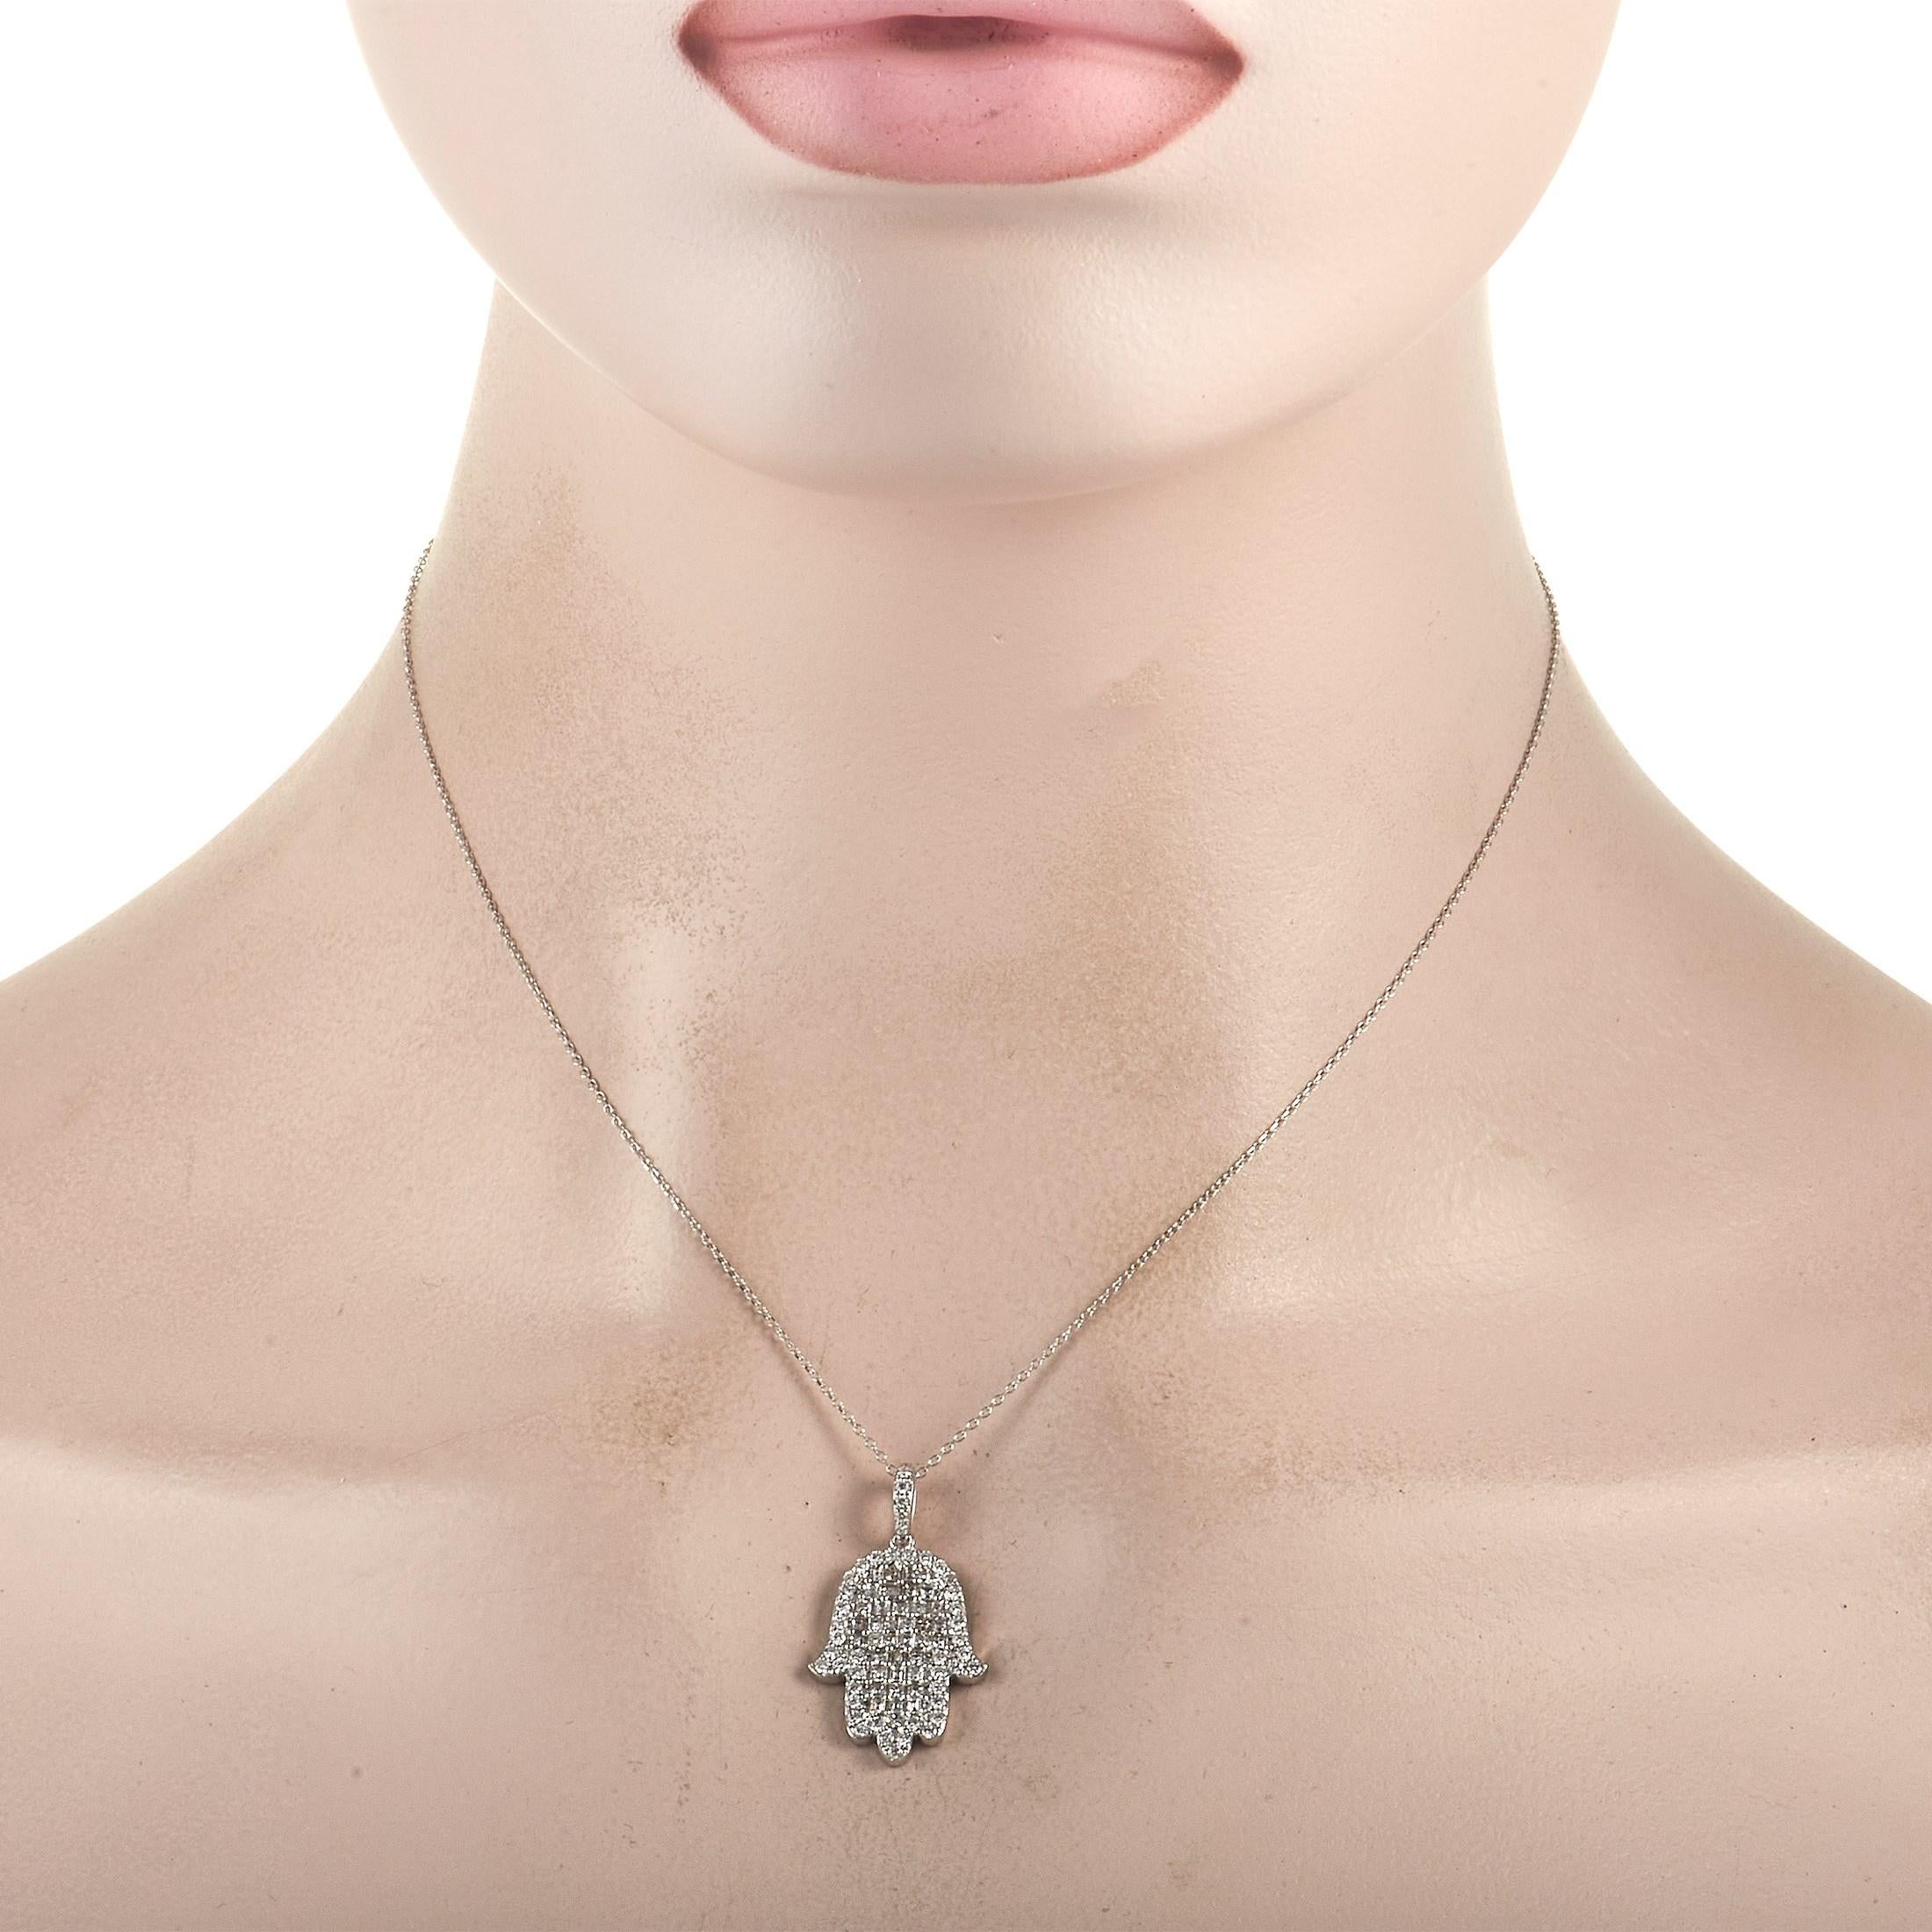 Here is a sparkly and lucky accessory to add to your jewelry box. The LB Exclusive 18K White Gold 1.23 ct Diamond Hamsa Necklace features a 16-inch long white gold chain holding a white gold palm-shaped pendant adorned with 0.52 ct round diamonds